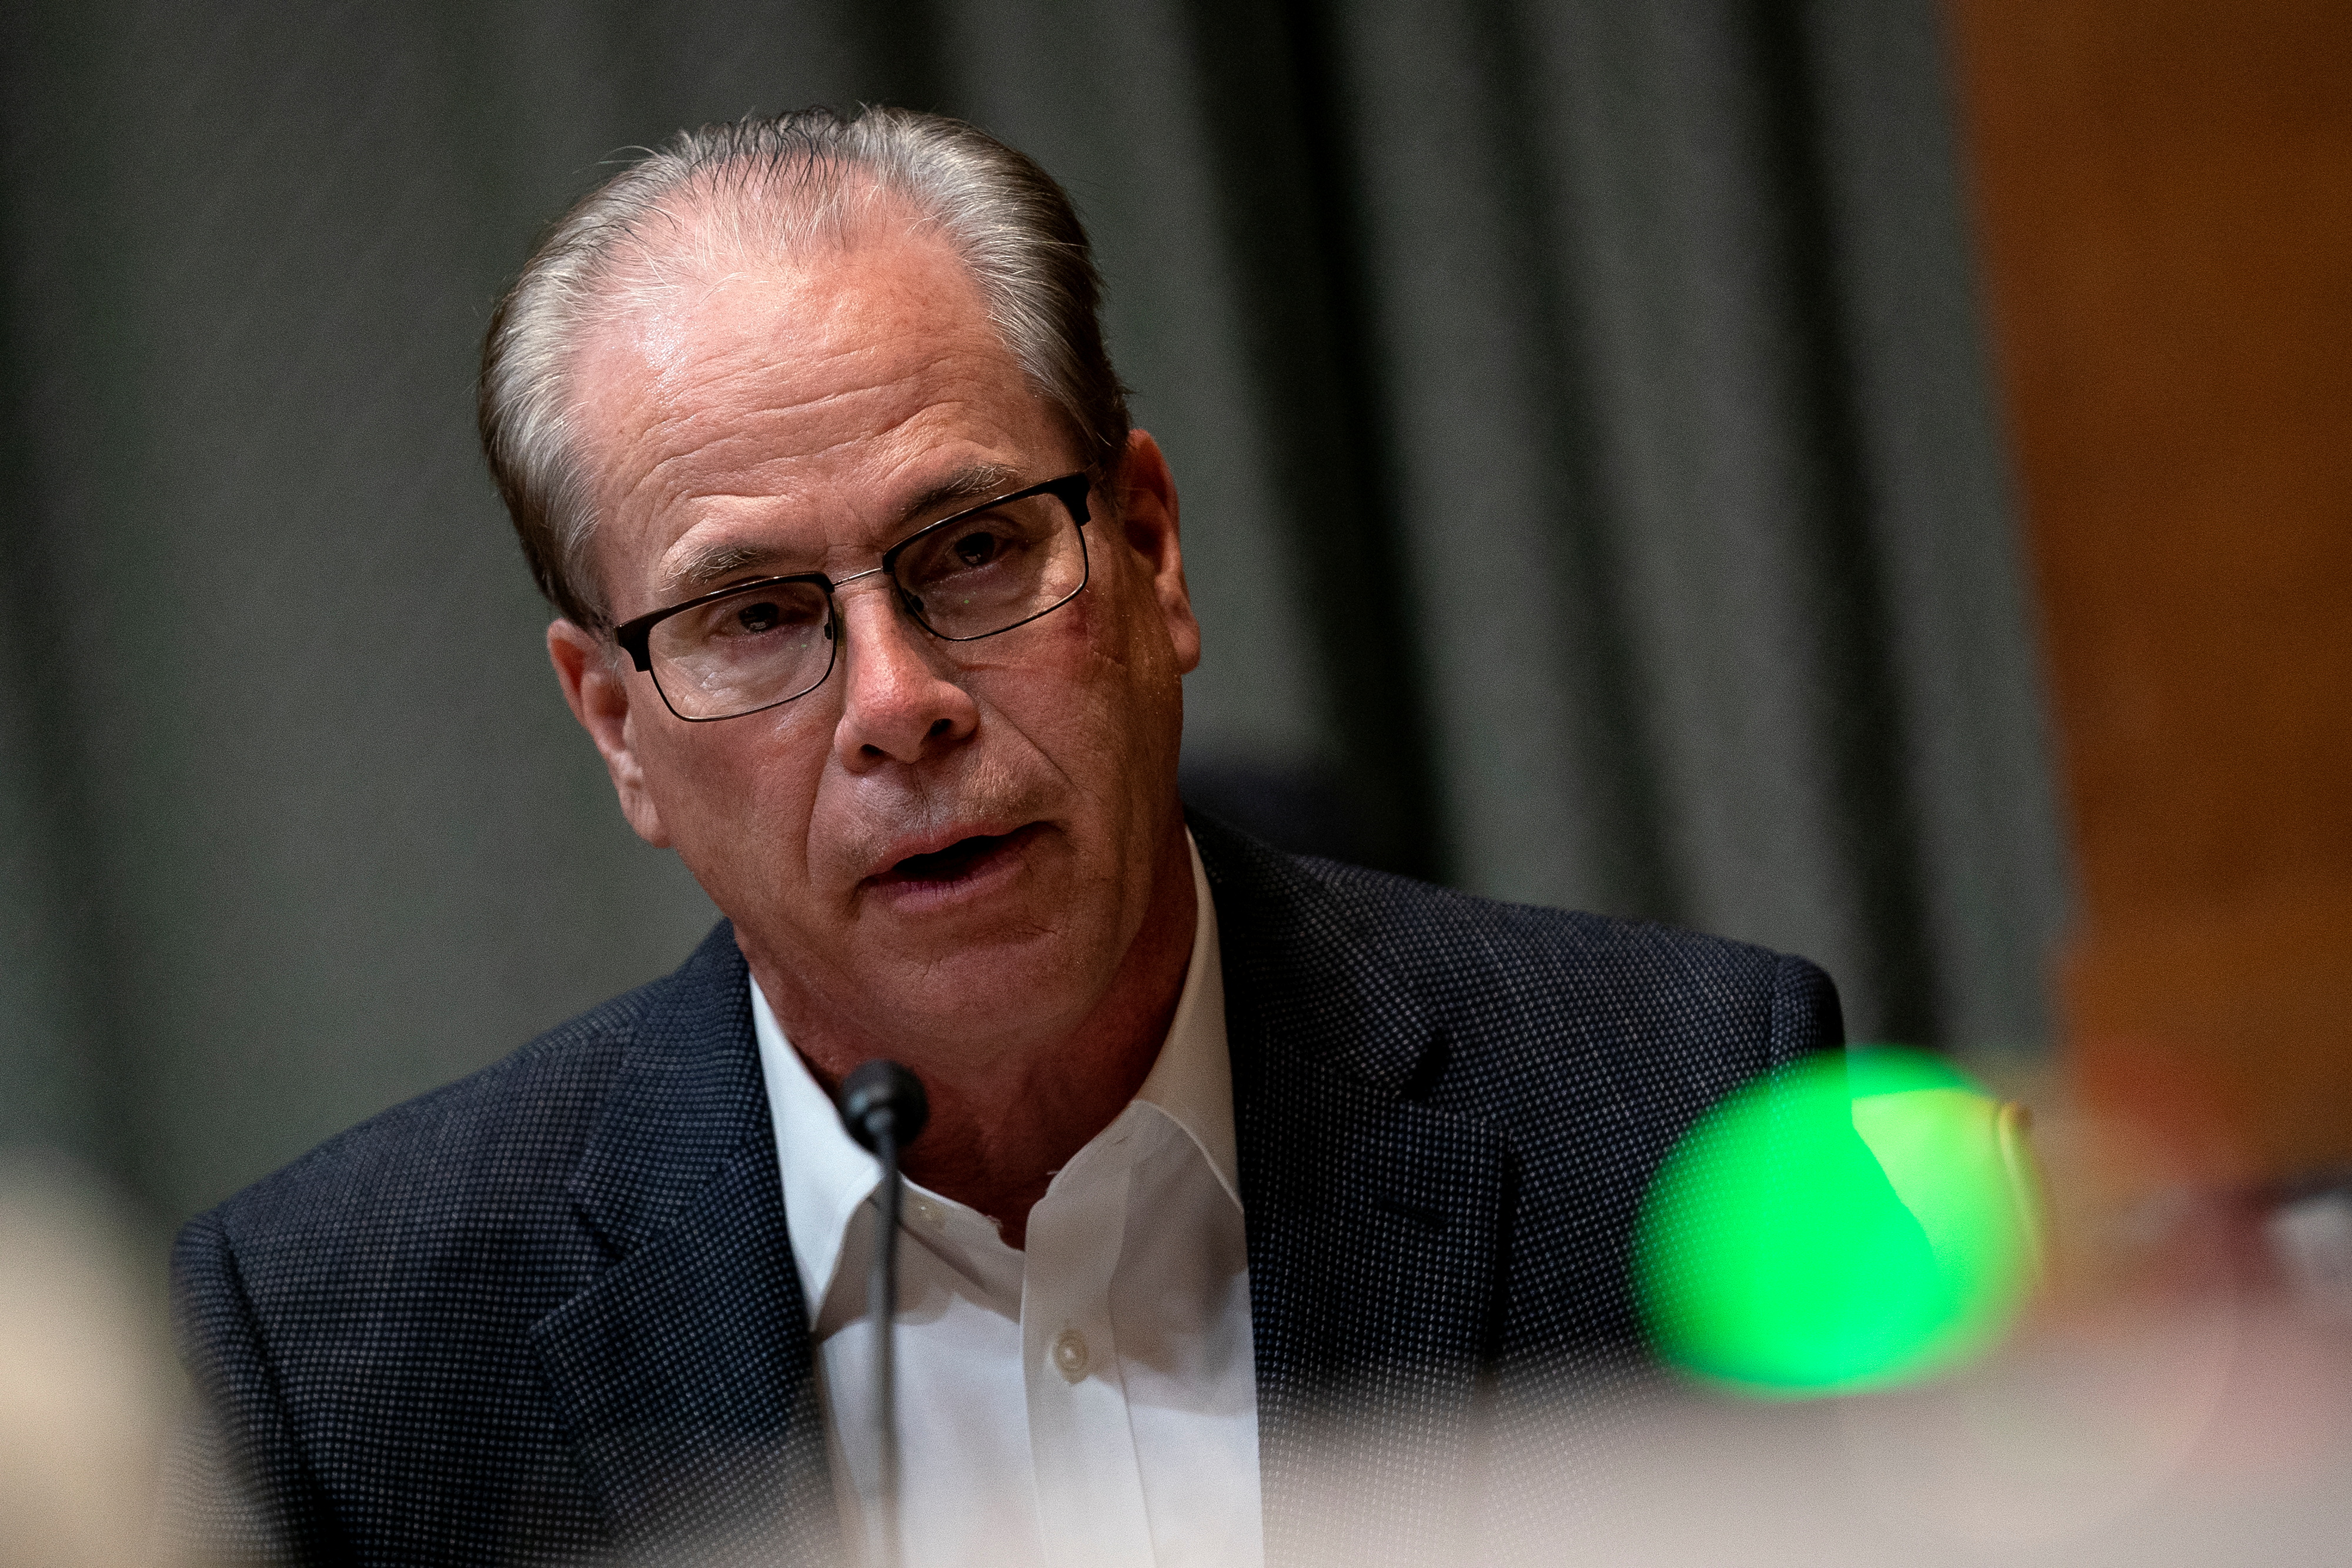 Senator Mike Braun (R-IN) speaks during a Senate Appropriations Subcommittee on Commerce, Justice, Science, and Related Agencies hearing at the Dirksen Senate Office building in Washington, D.C., U.S., June 9, 2021. Stefani Reynolds/Pool via REUTERS/Files